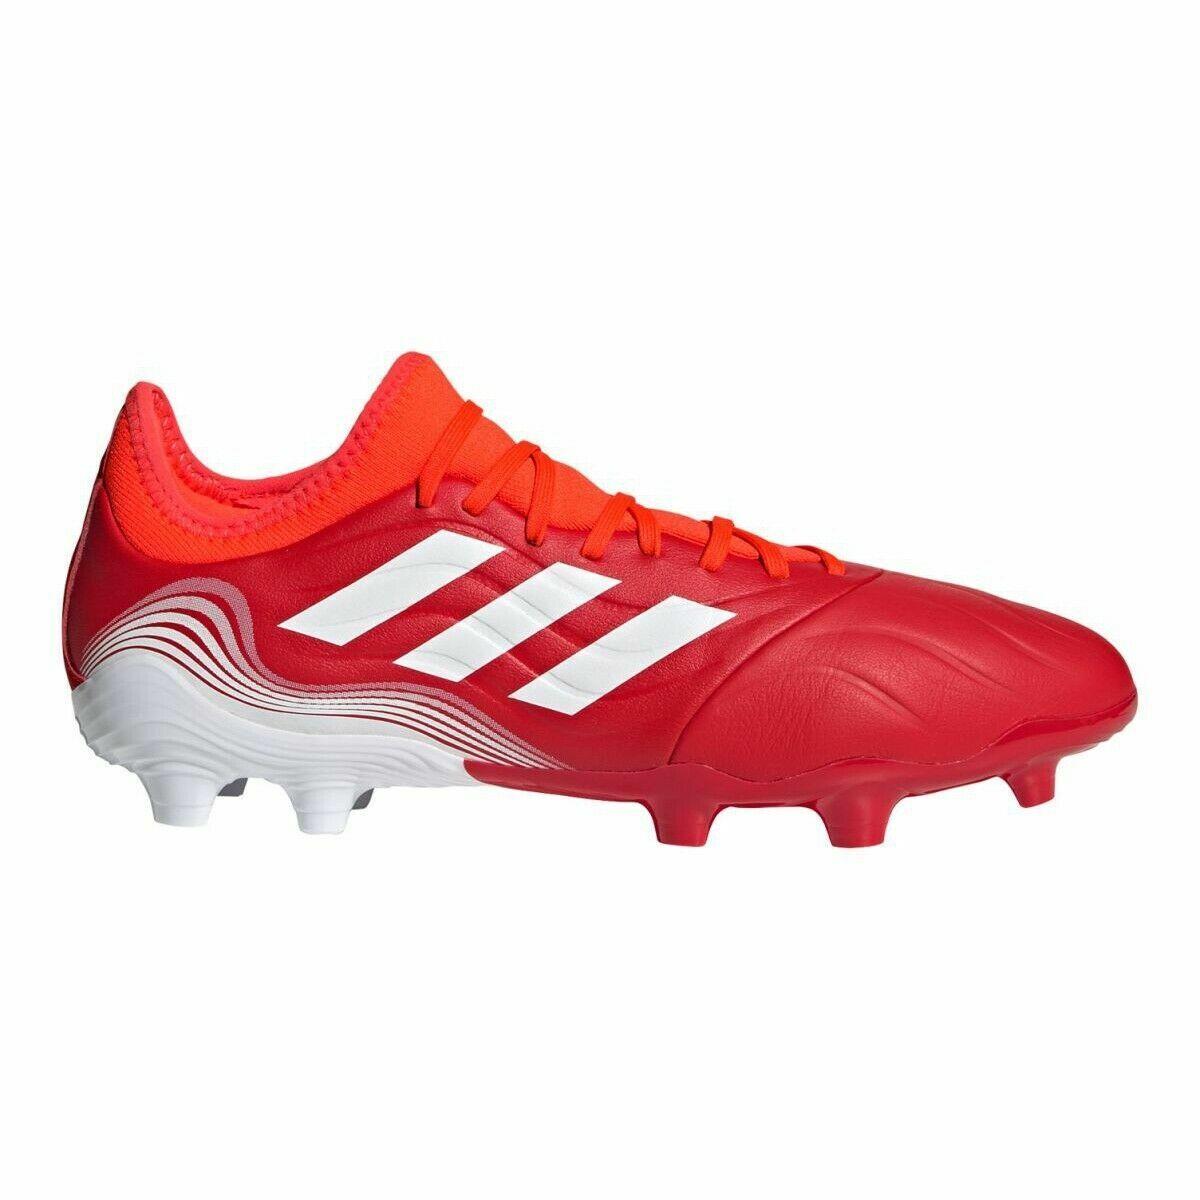 Adidas Copa Sense.3 Fg M FY6196 Football/soccer Multicolored Cleat Mens Size 13 - Multicolor , Red Dominant